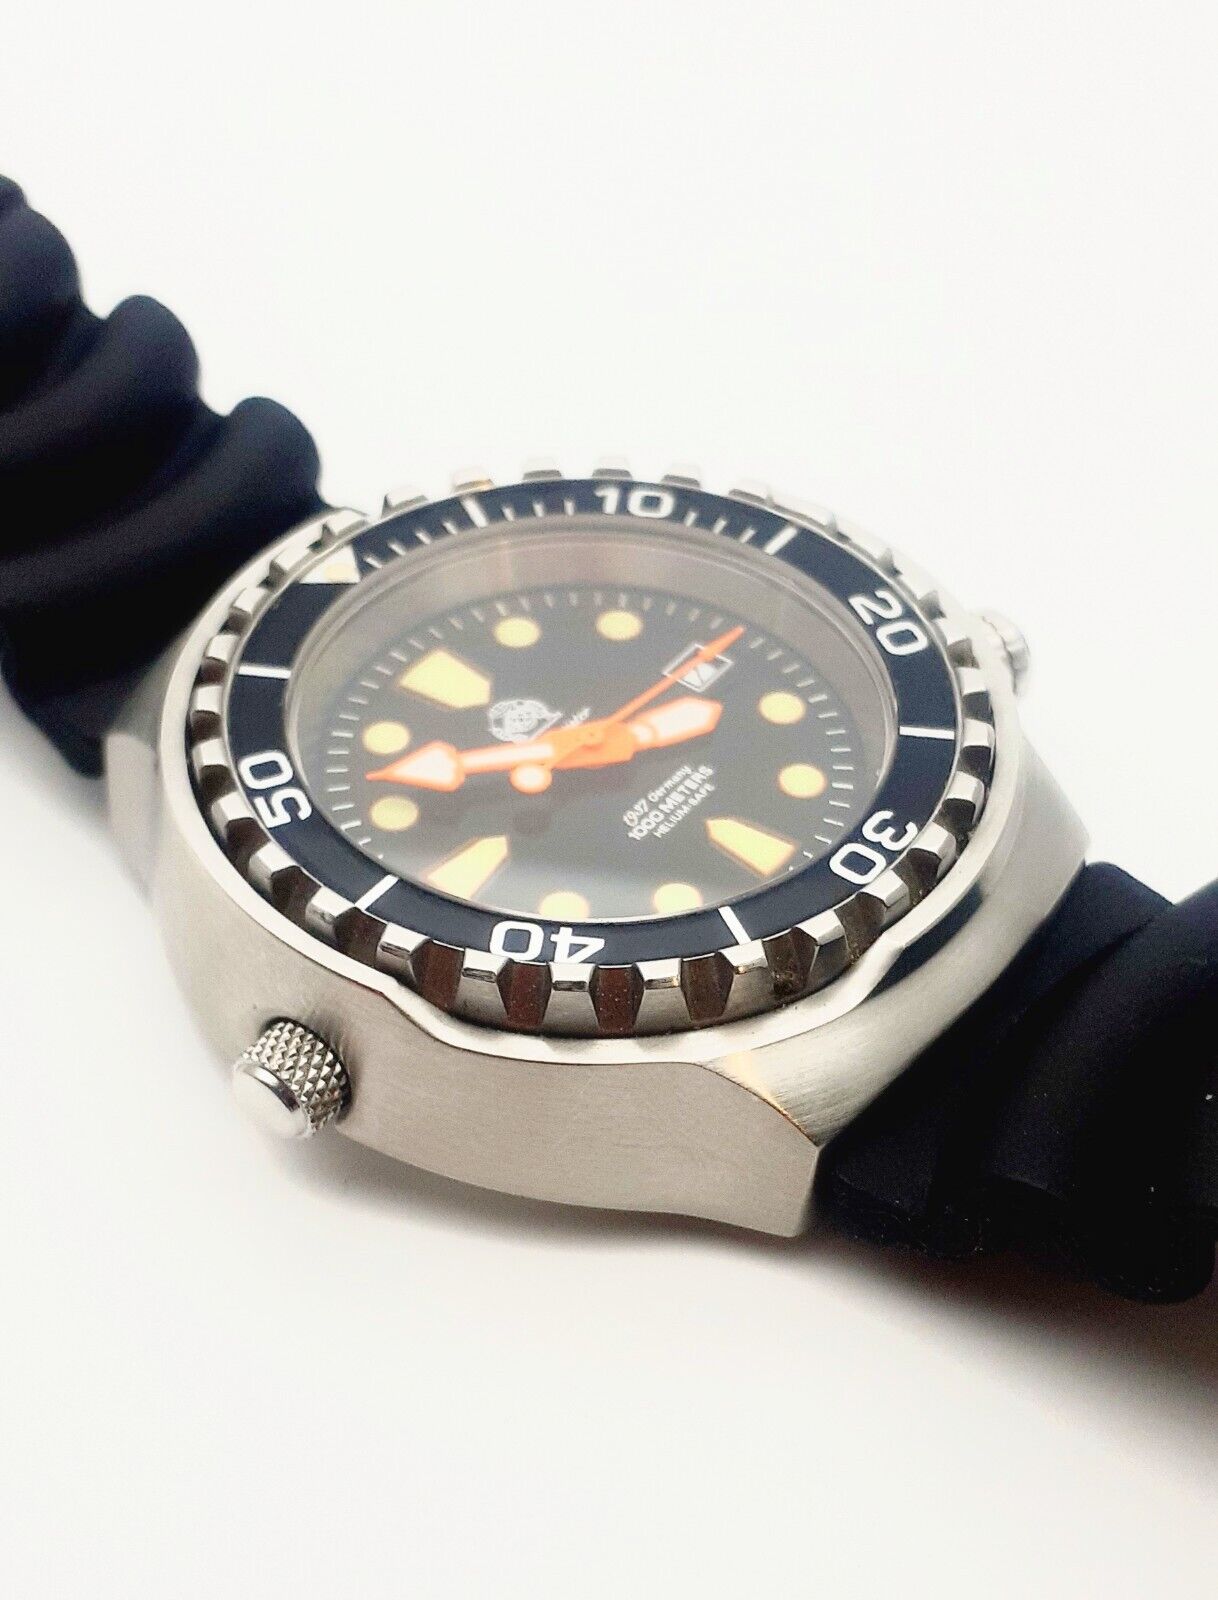 Tauchmeister 1937 Aeromatic Helium Safe 1000m Gents Divers Watch VERY ...